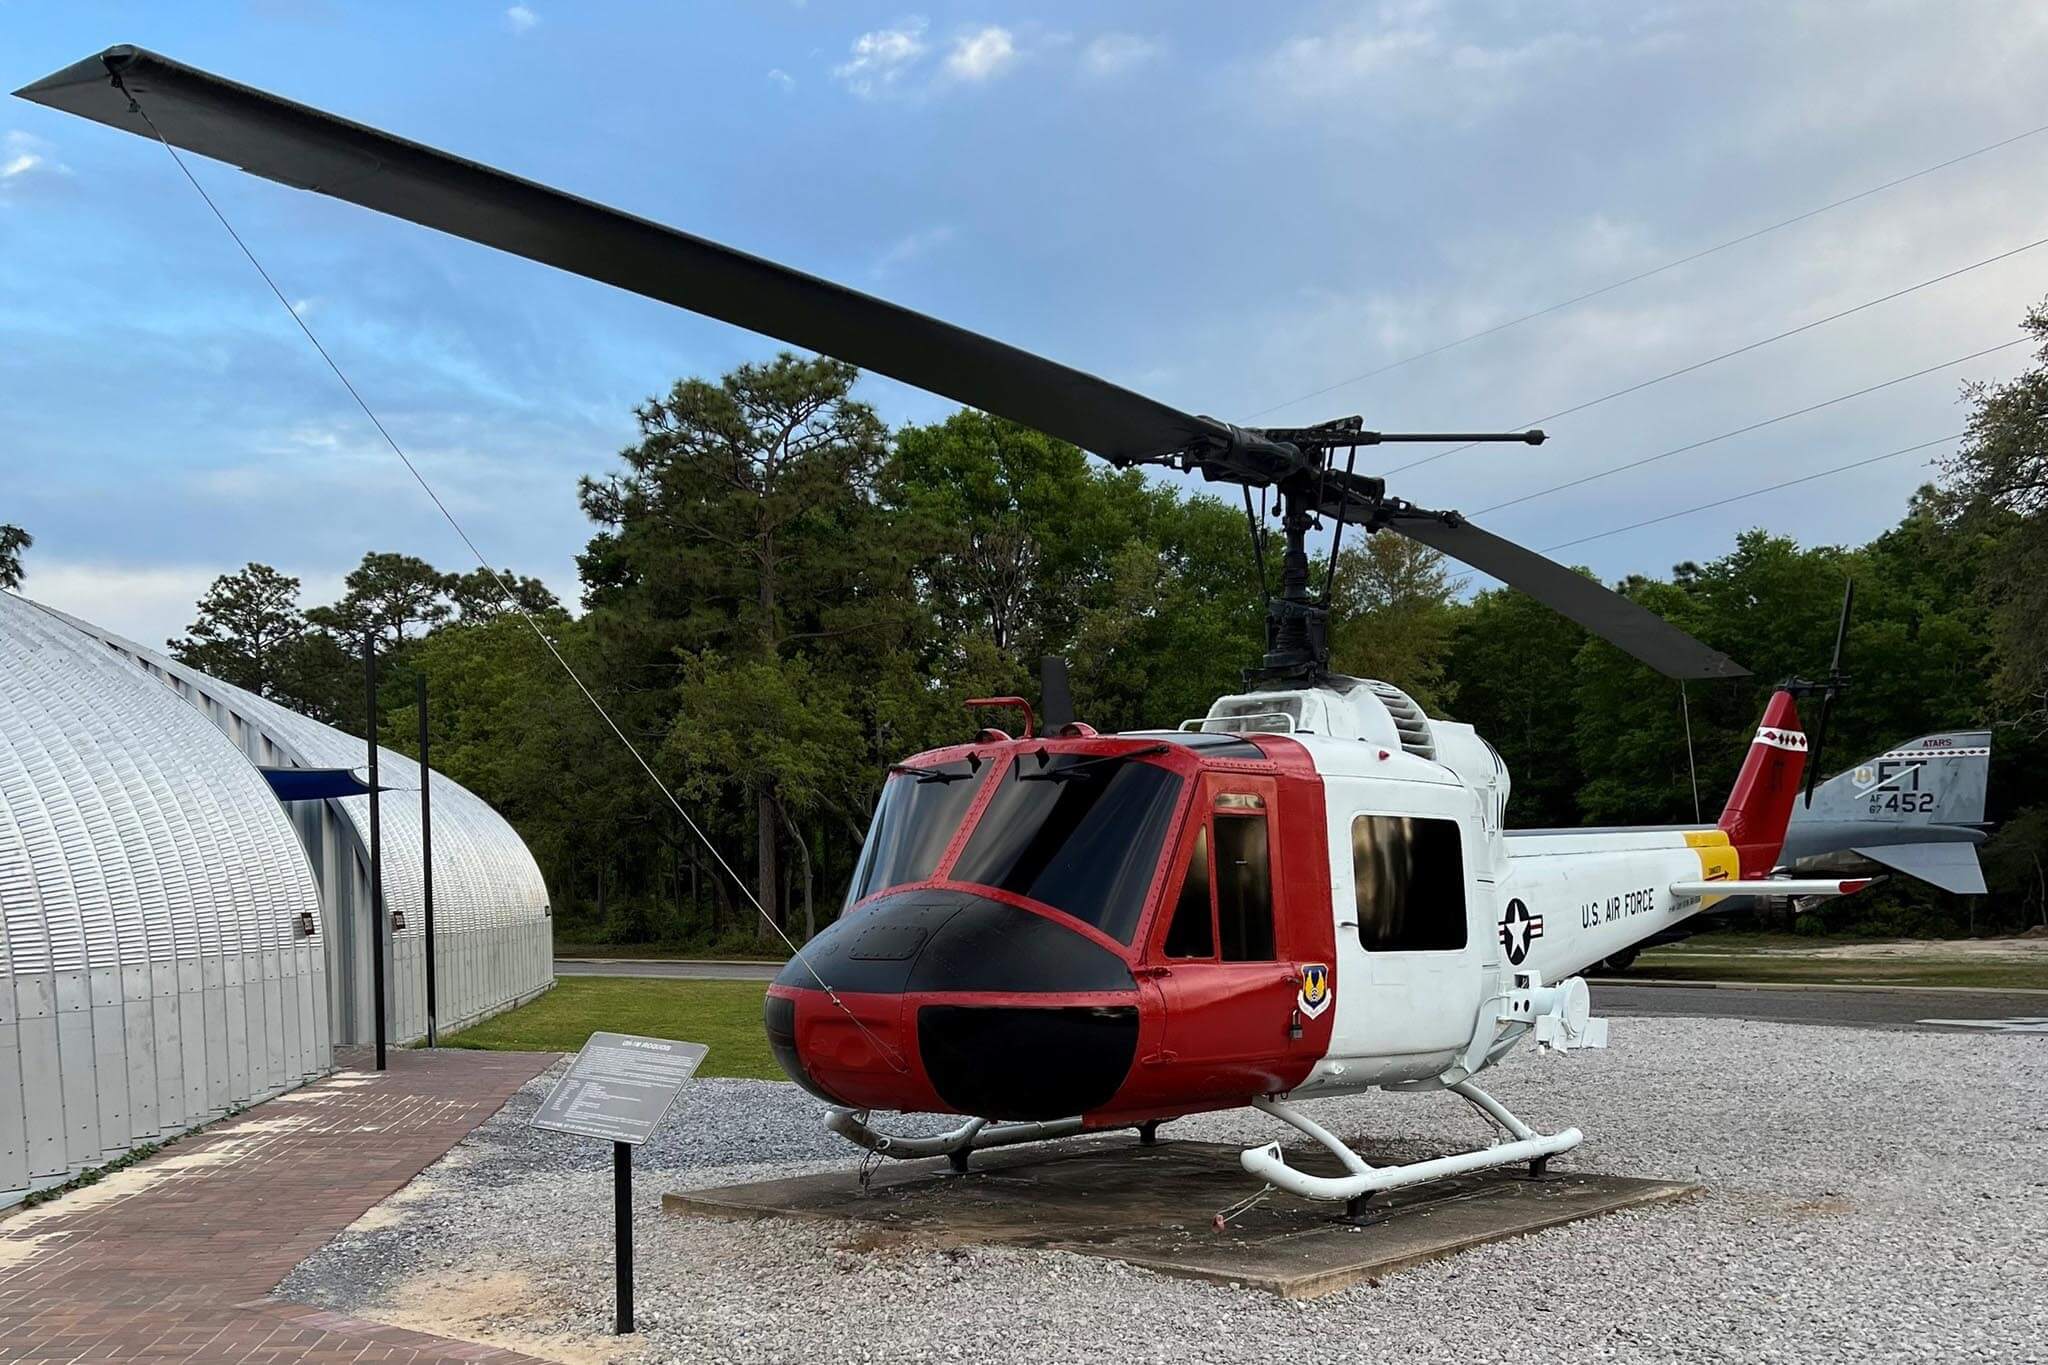 Helicopter at Air Force Armament Museum